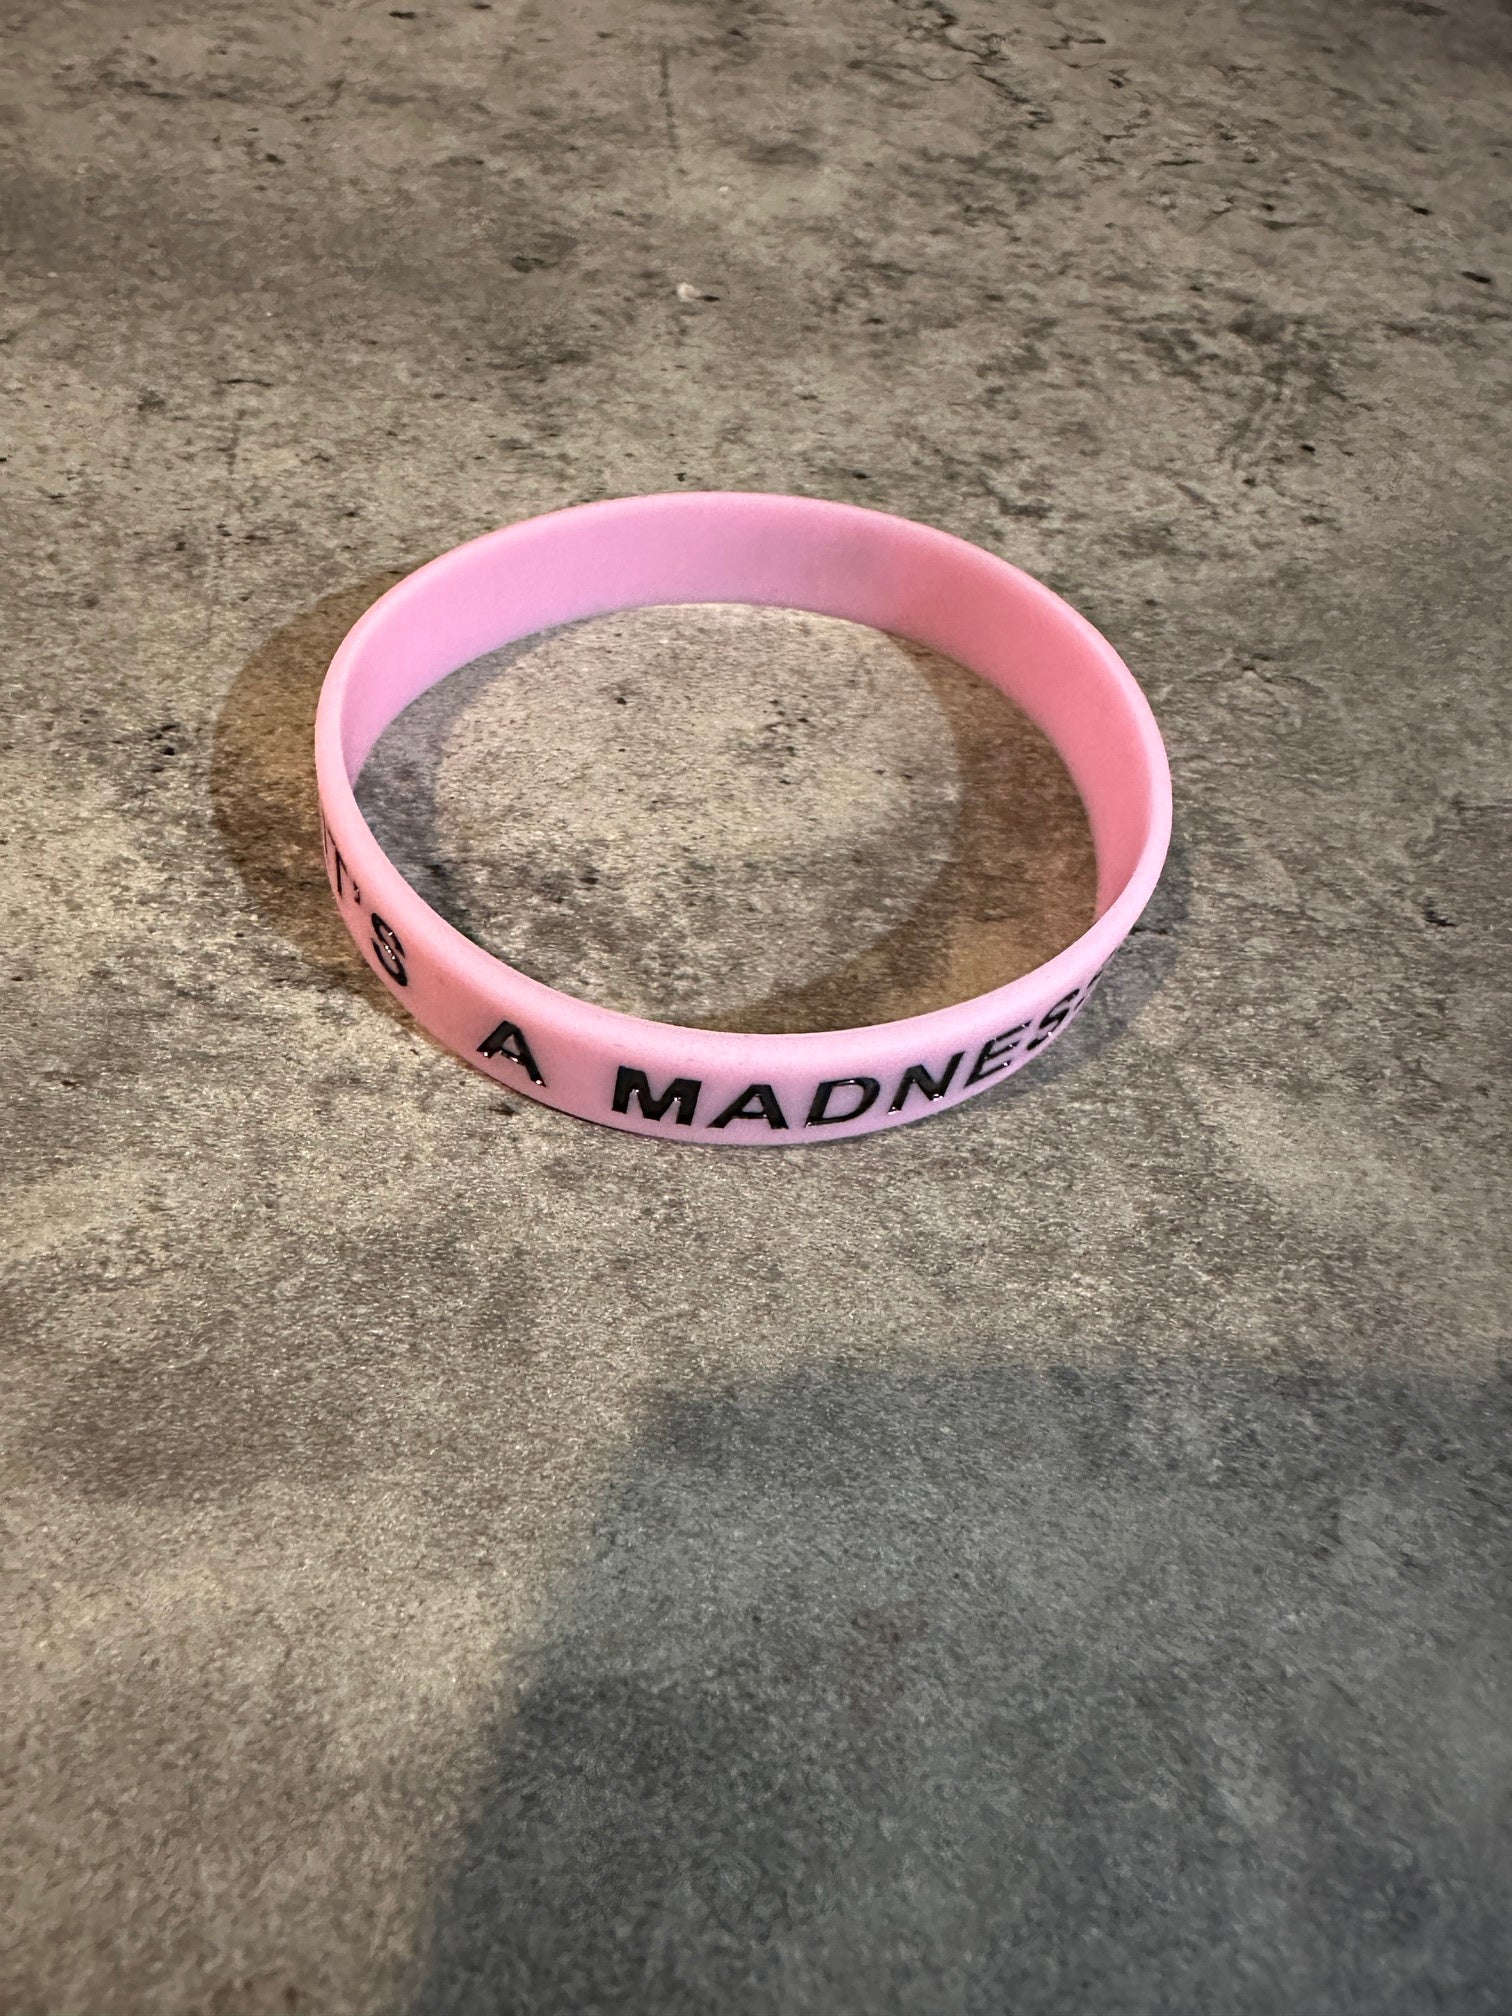 It's a madness WRISTBANDS